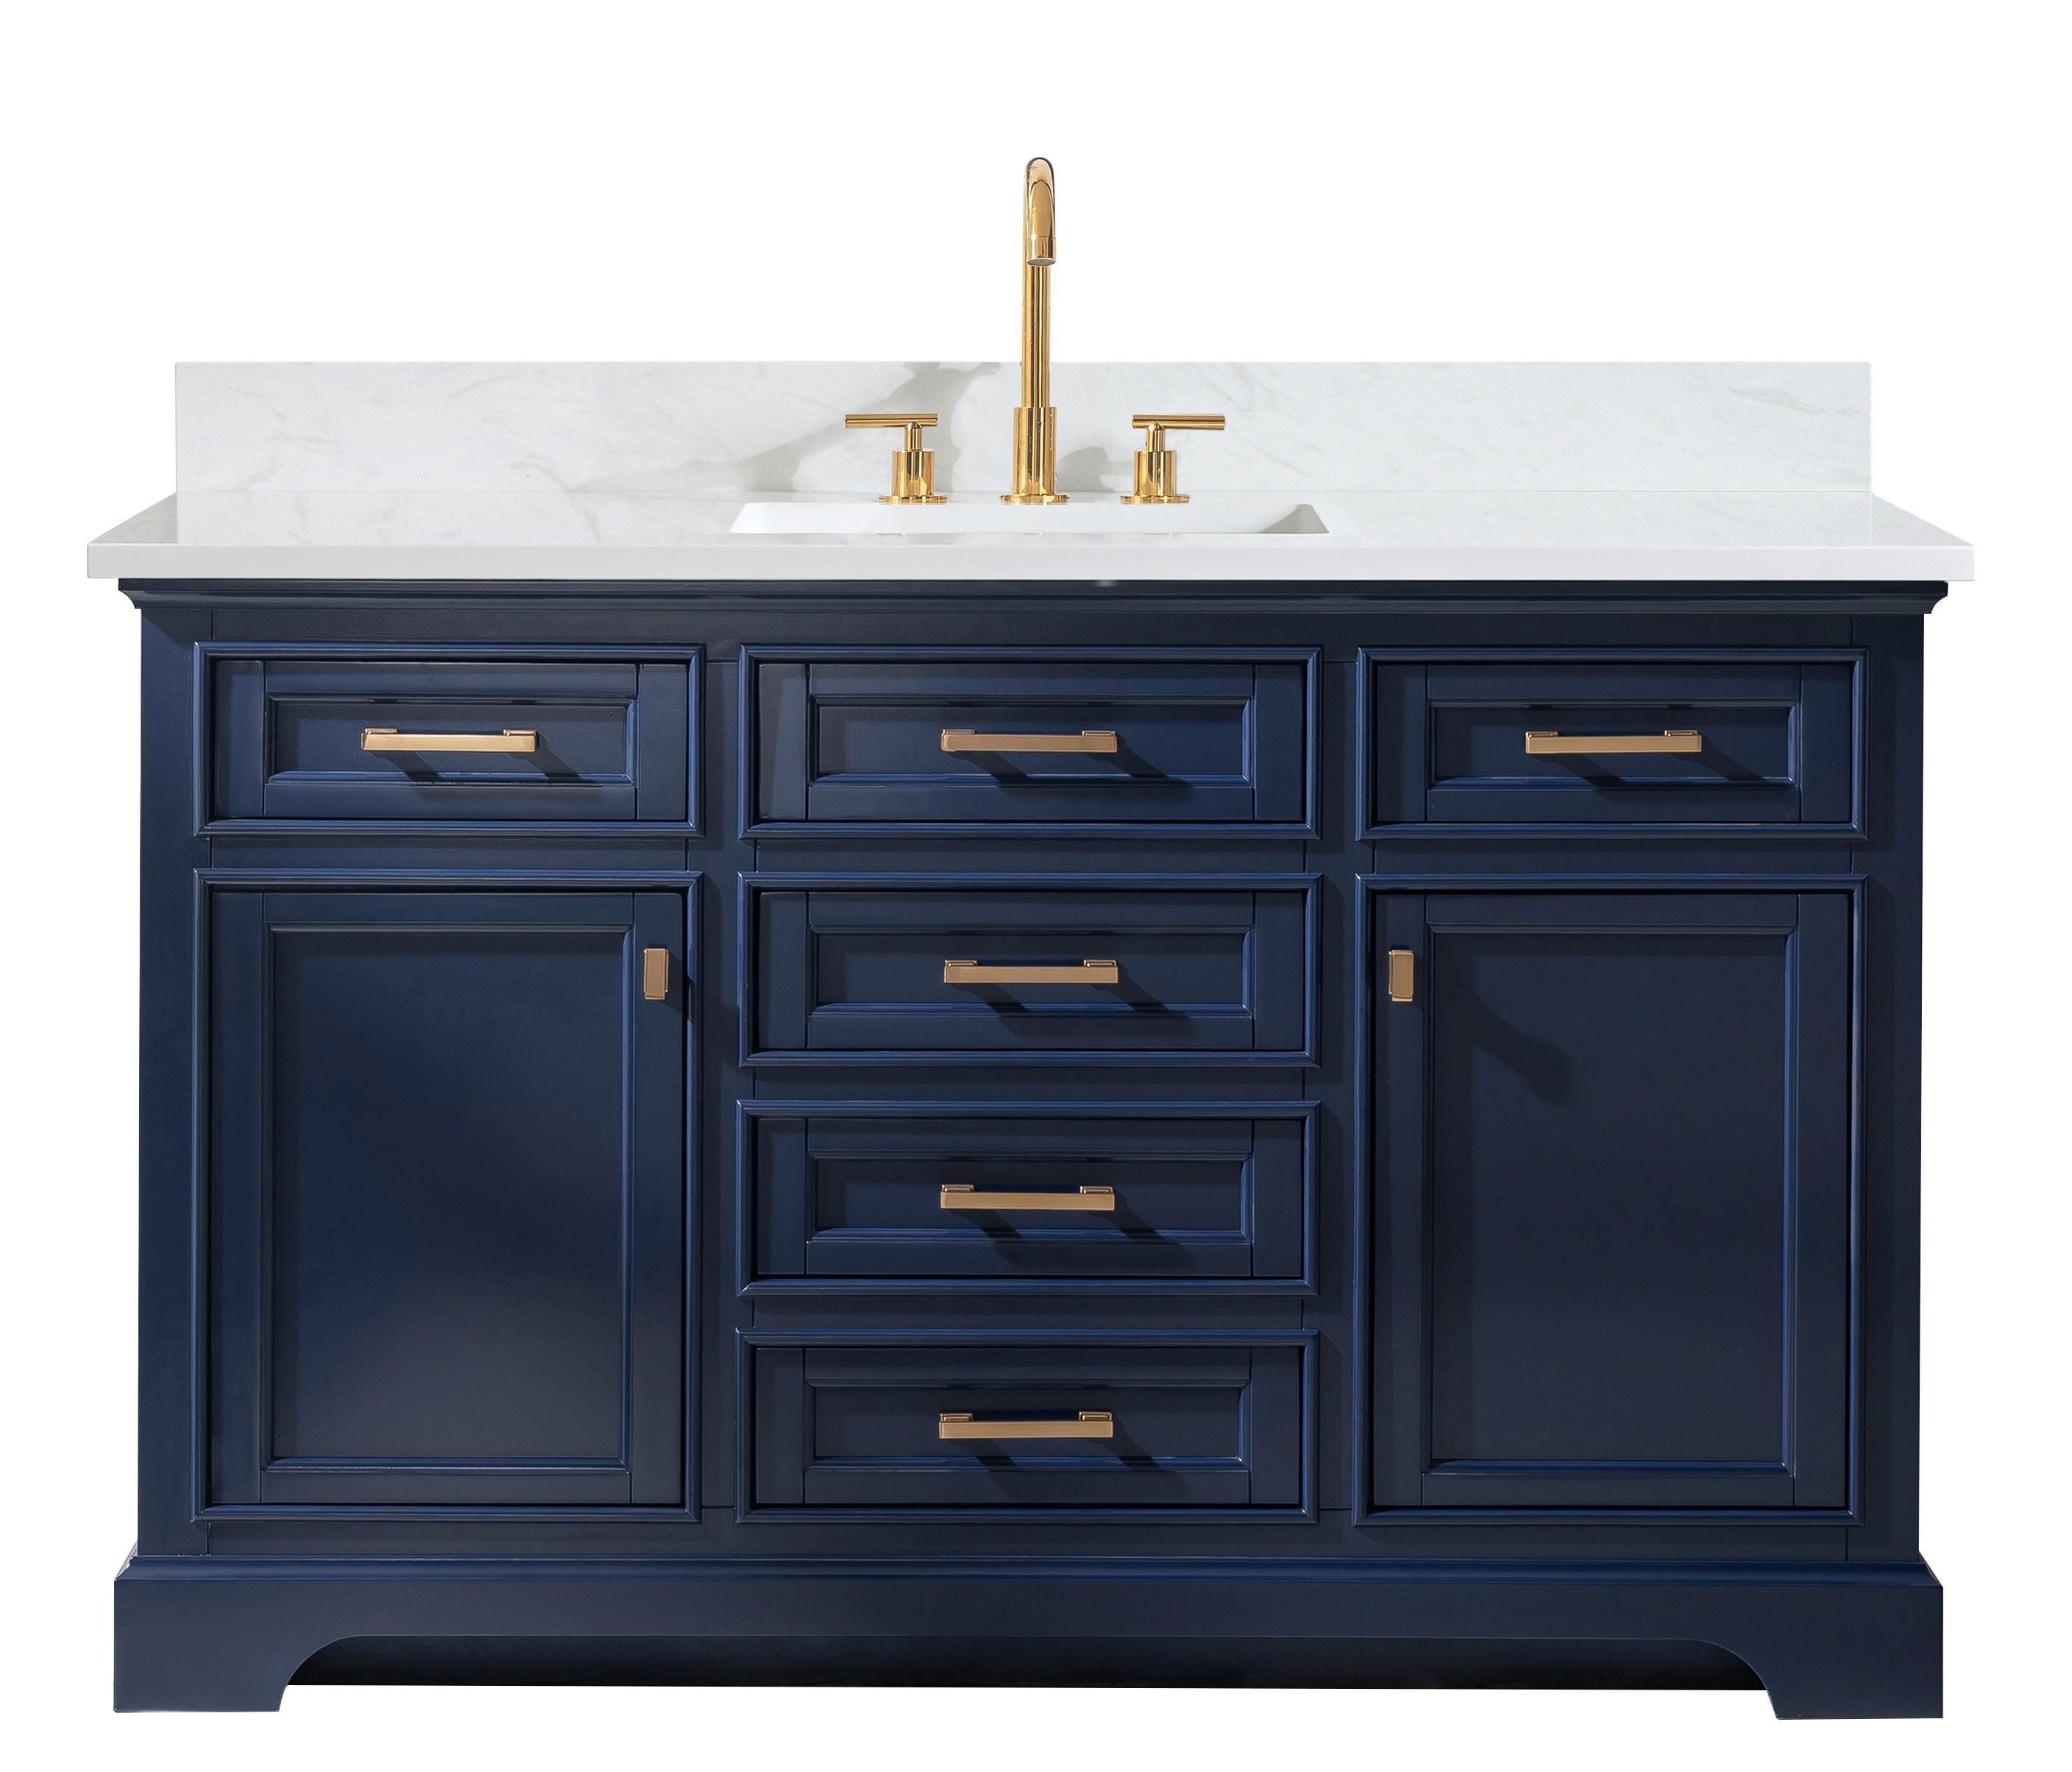 Transitional 54" Single Sink Vanity with 1" Thick White Quartz Countertop in Blue Finish